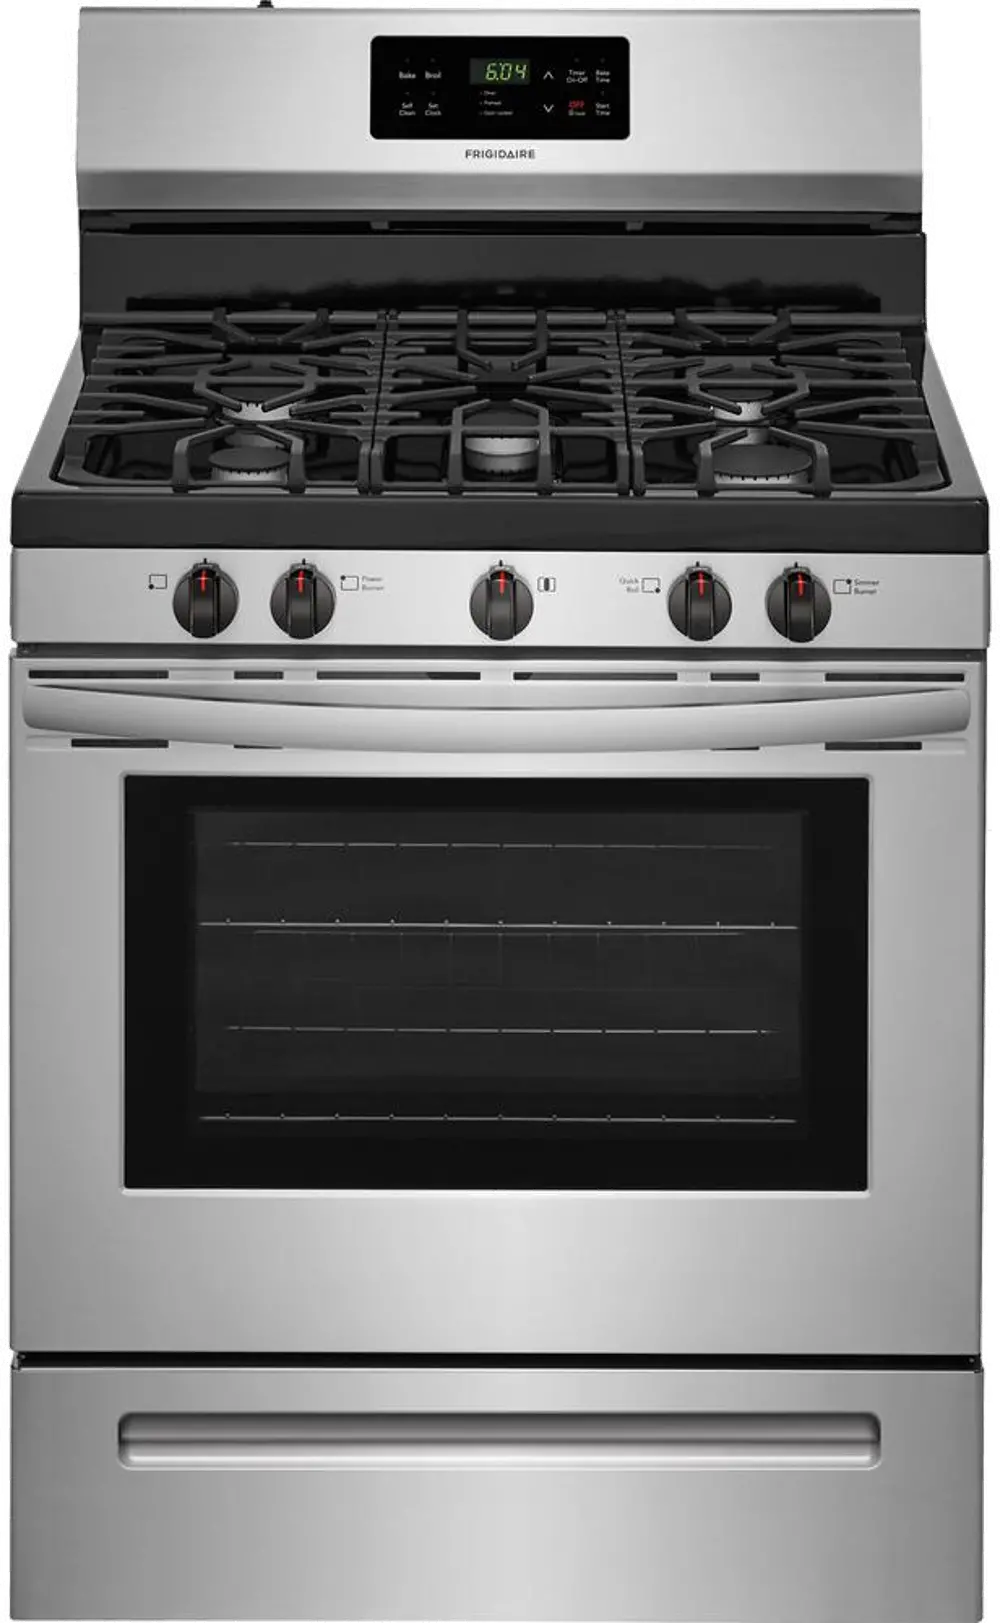 FFGF3054TS Frigidaire 5.0 cu ft Gas Range - Stainless Steel-1